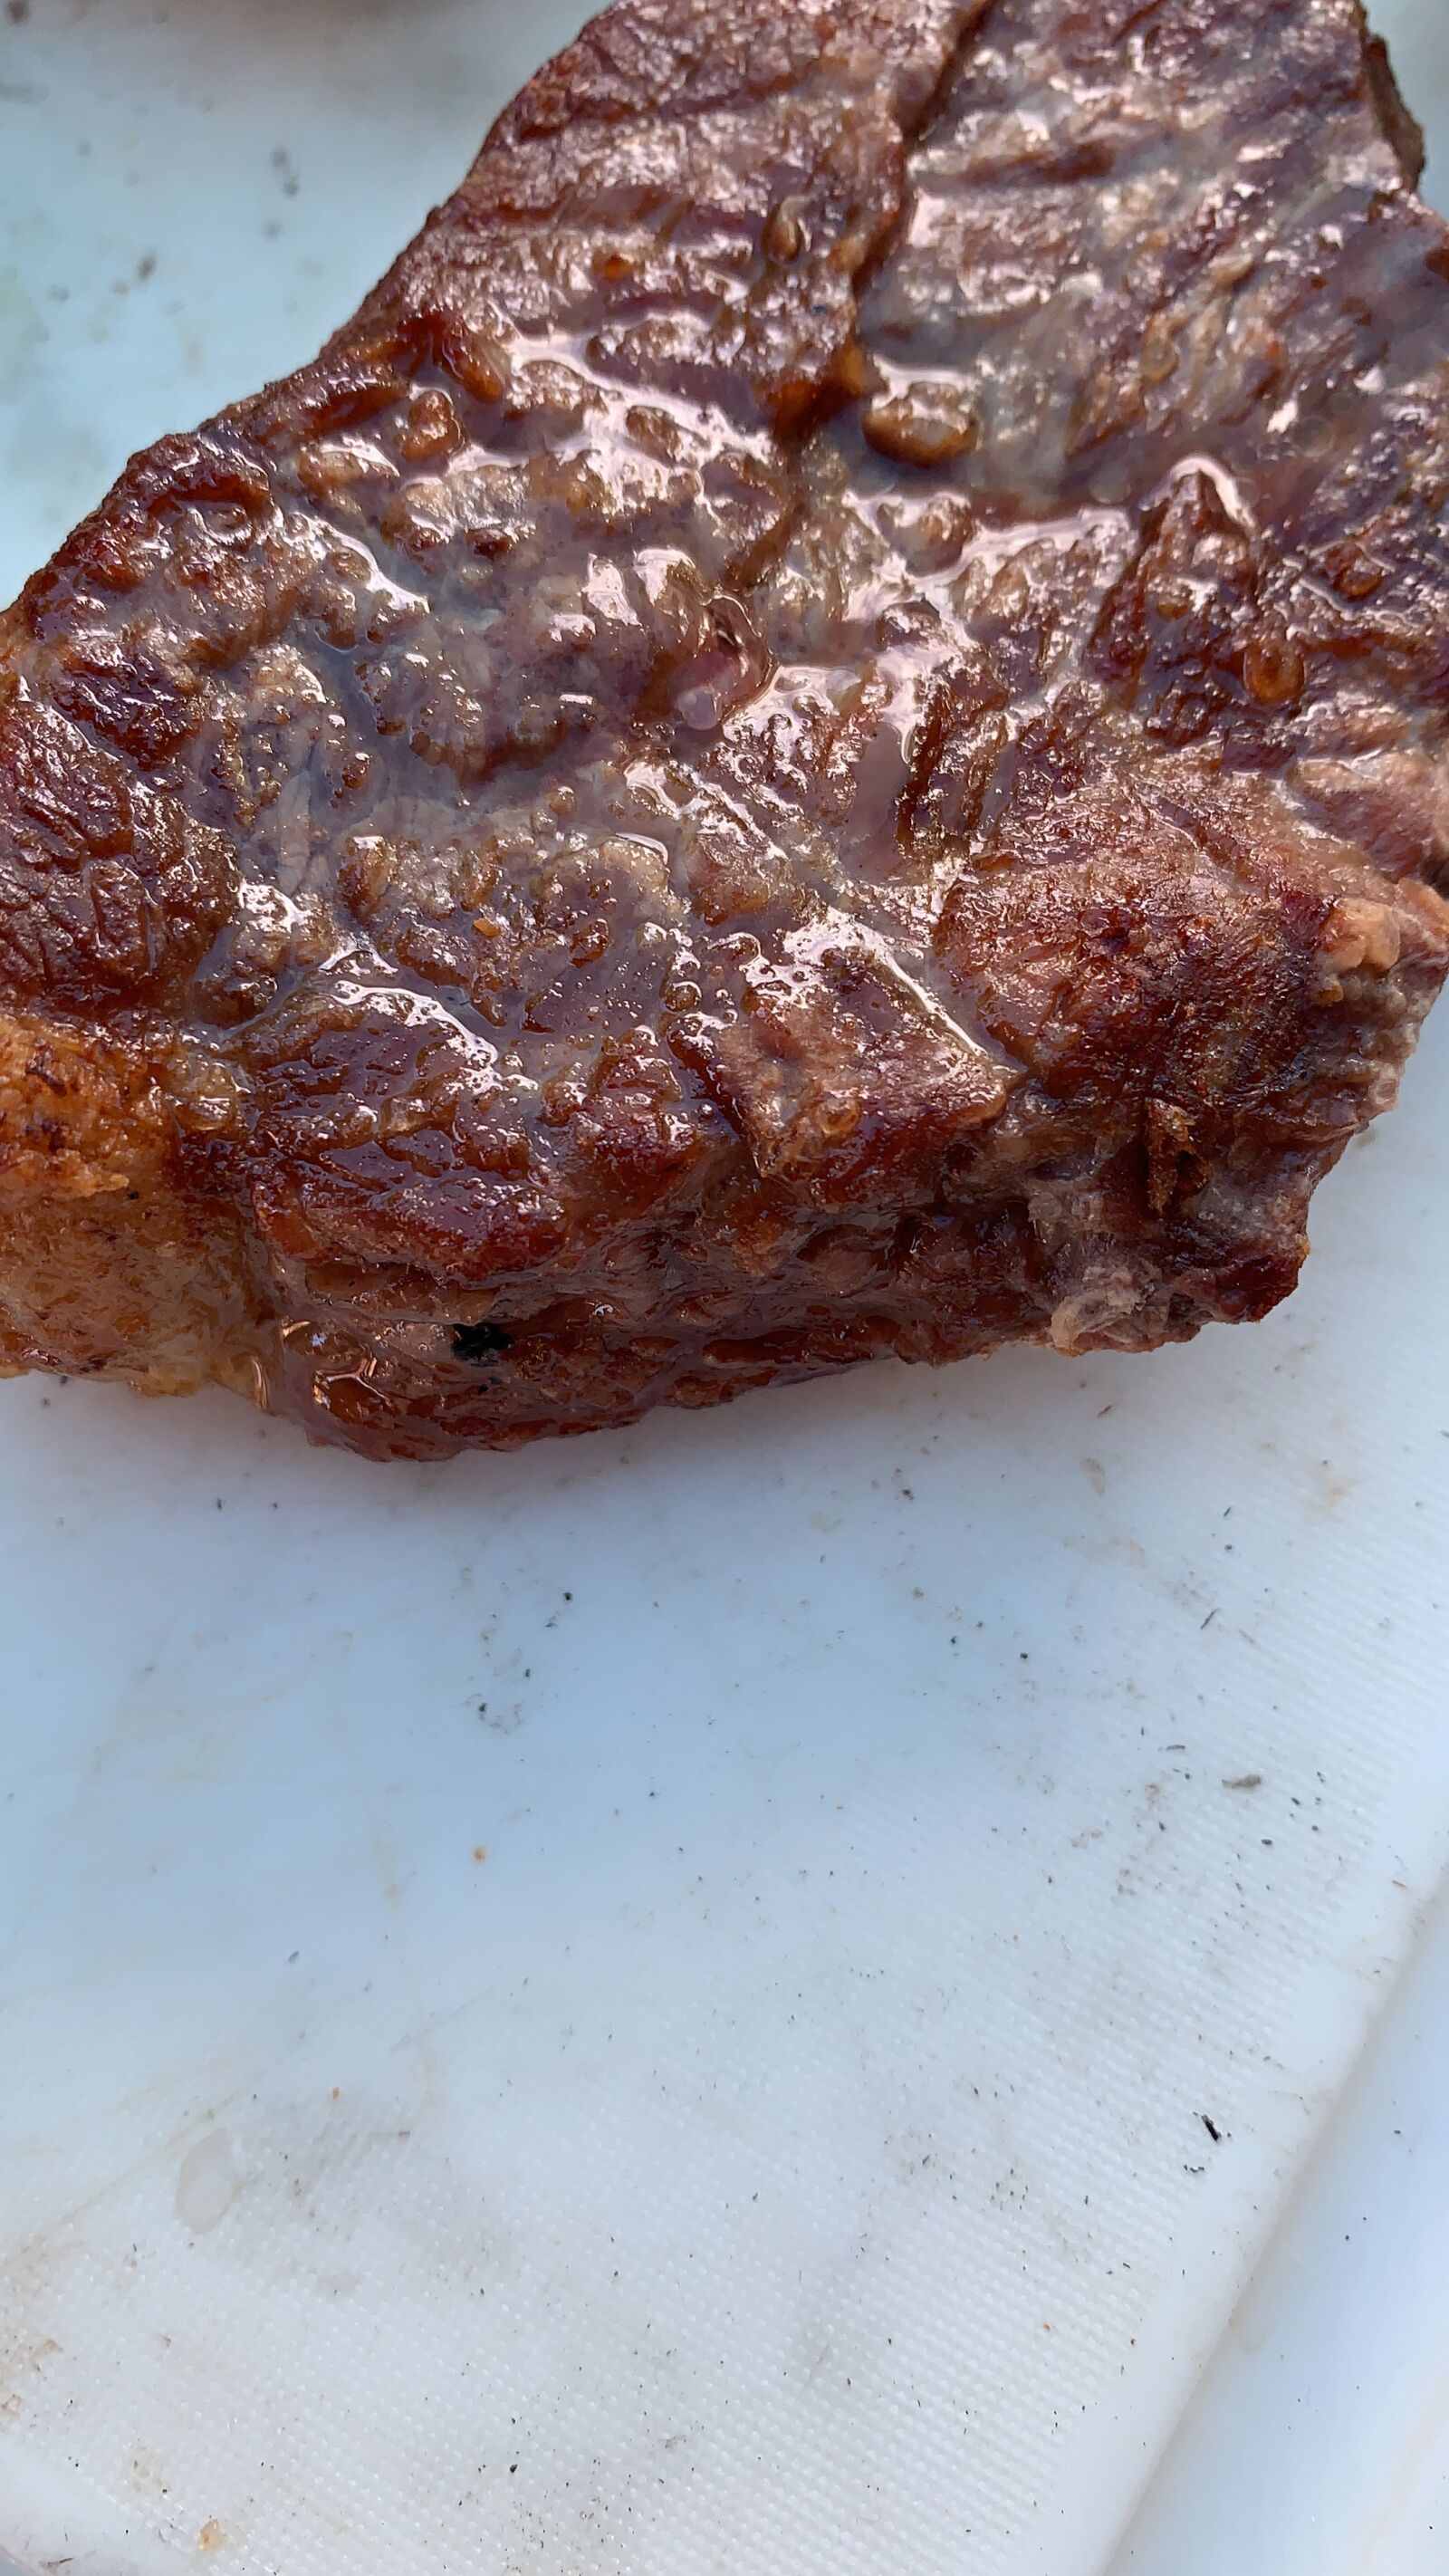 Apple iPhone XR sample photo. Meat, barbecue, the cake photography